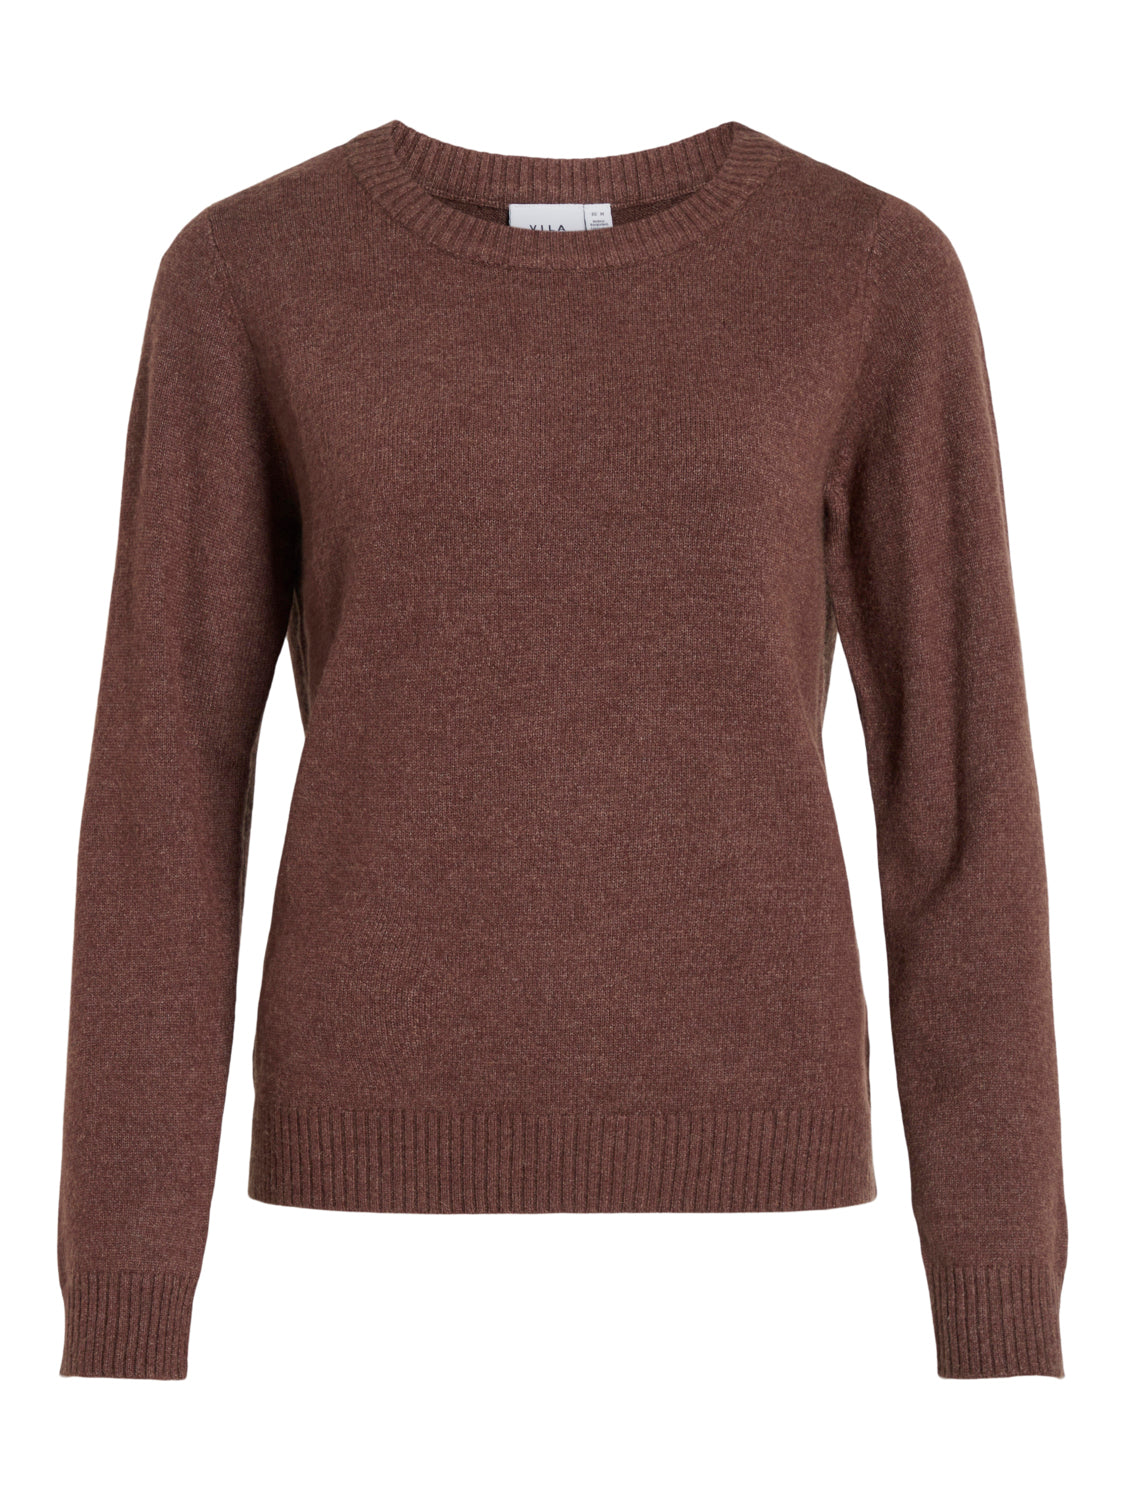 VIRIL Pullover - Shaved Chocolate